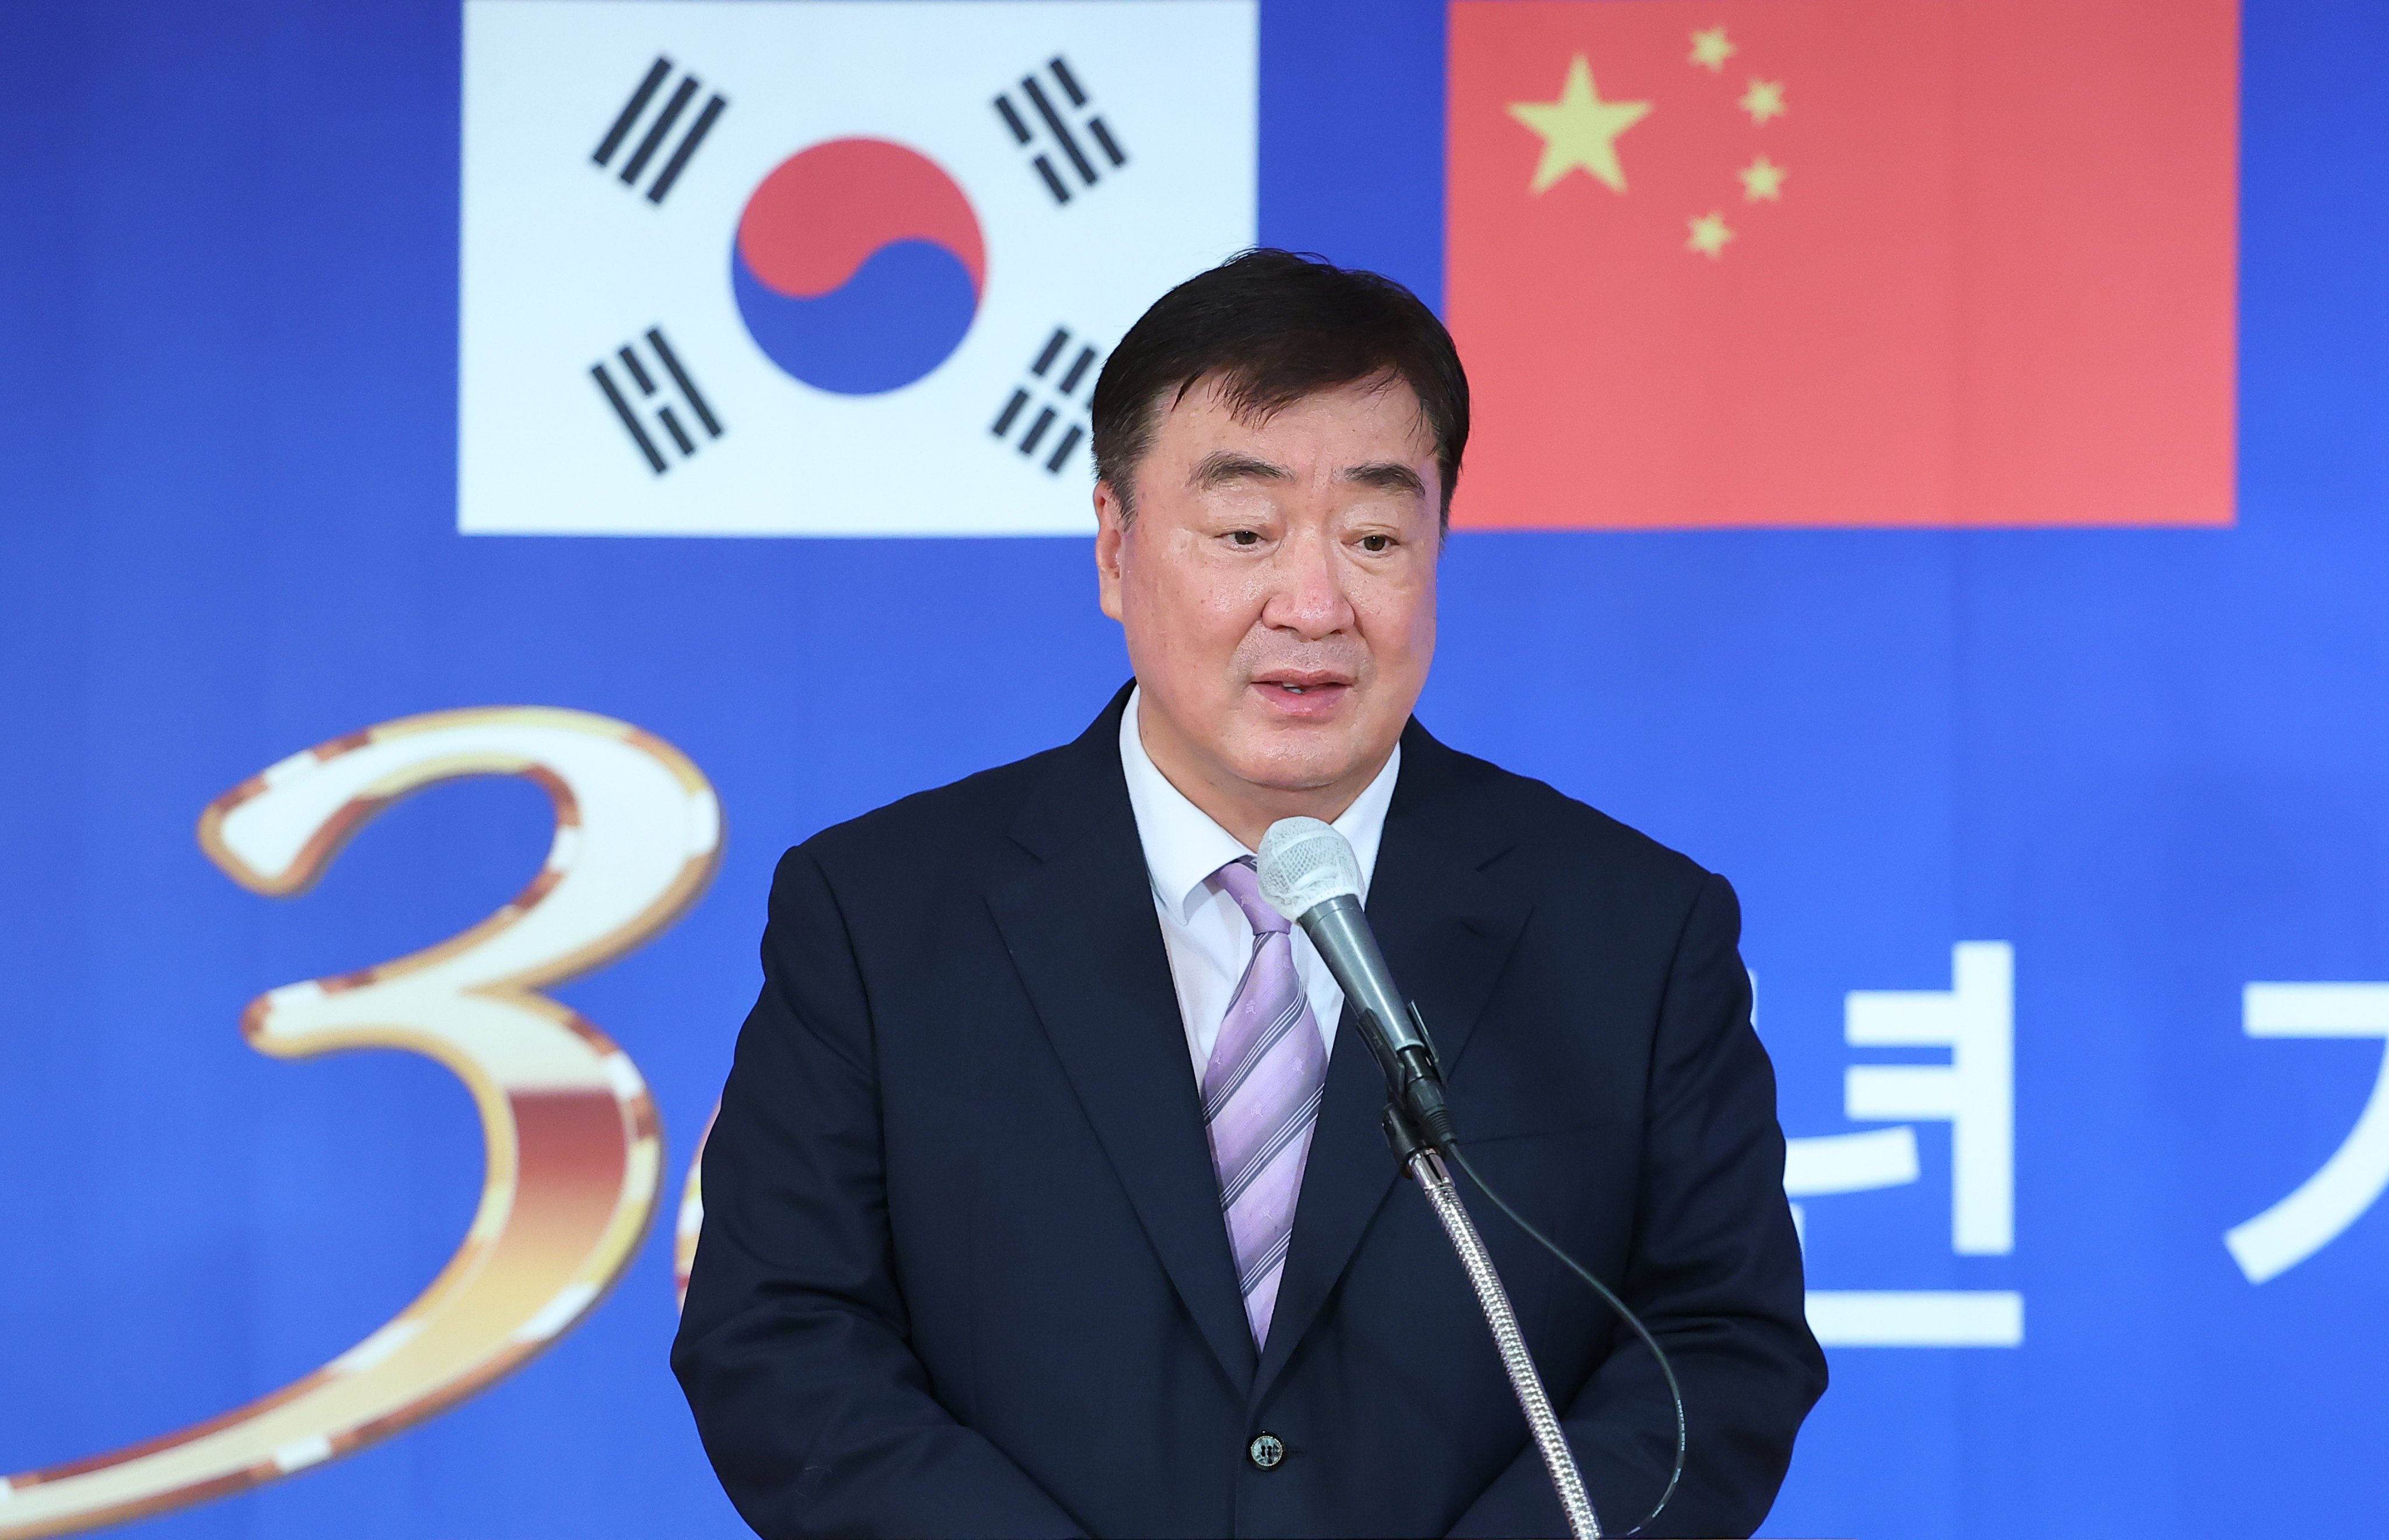 China’s ambassador to South Korea Xing Haiming addressed “disturbances and difficulties” in diplomatic ties between Beijing and Seoul, in an interview on Friday. Photo: DPA